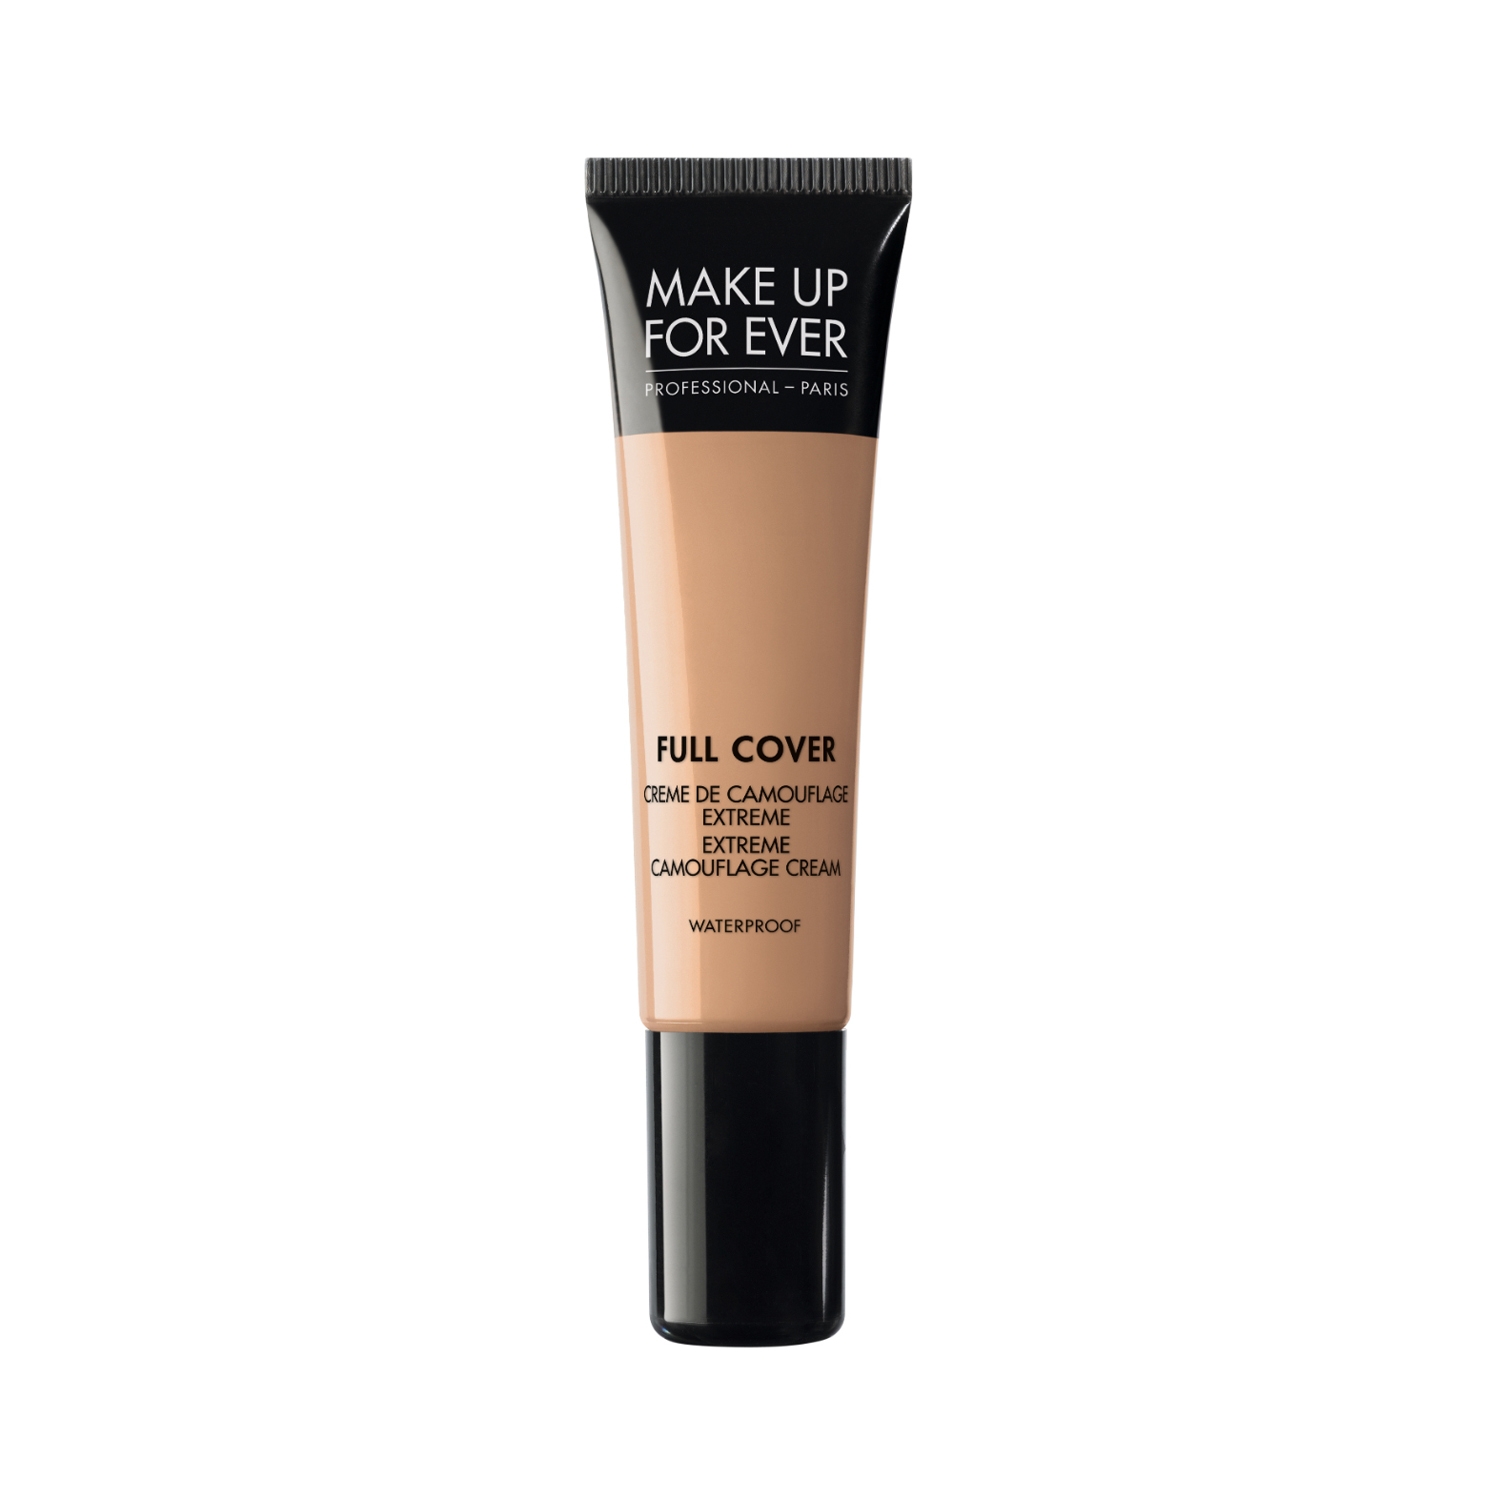 Make Up For Ever | Make Up For Ever Full Cover Extreme Camouflage Cream 08 (15ml)